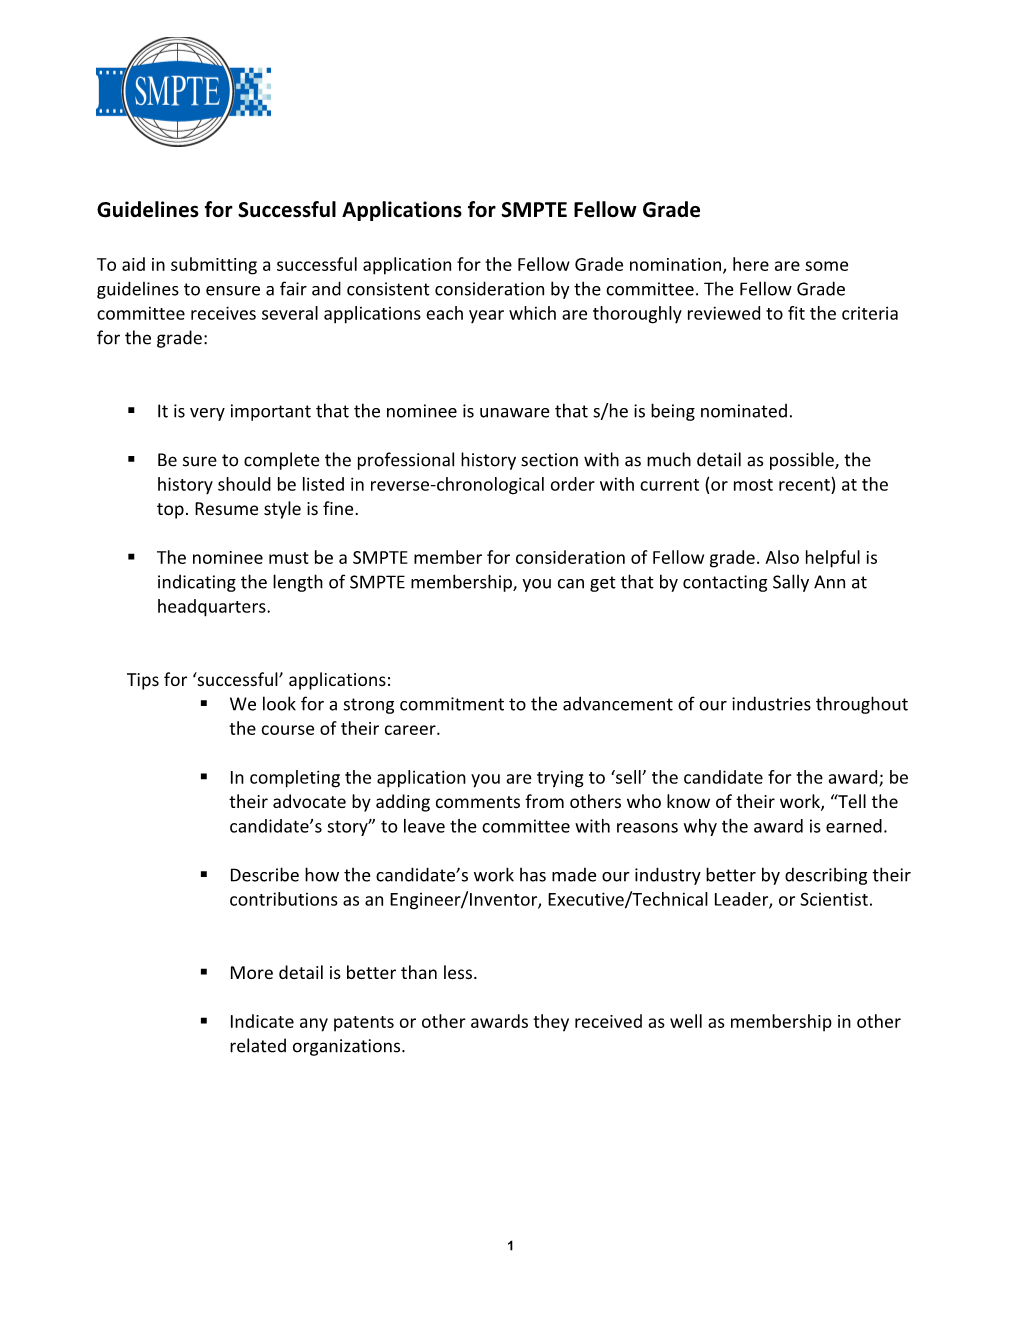 Guidelines for Successful Applications for SMPTE Fellow Grade